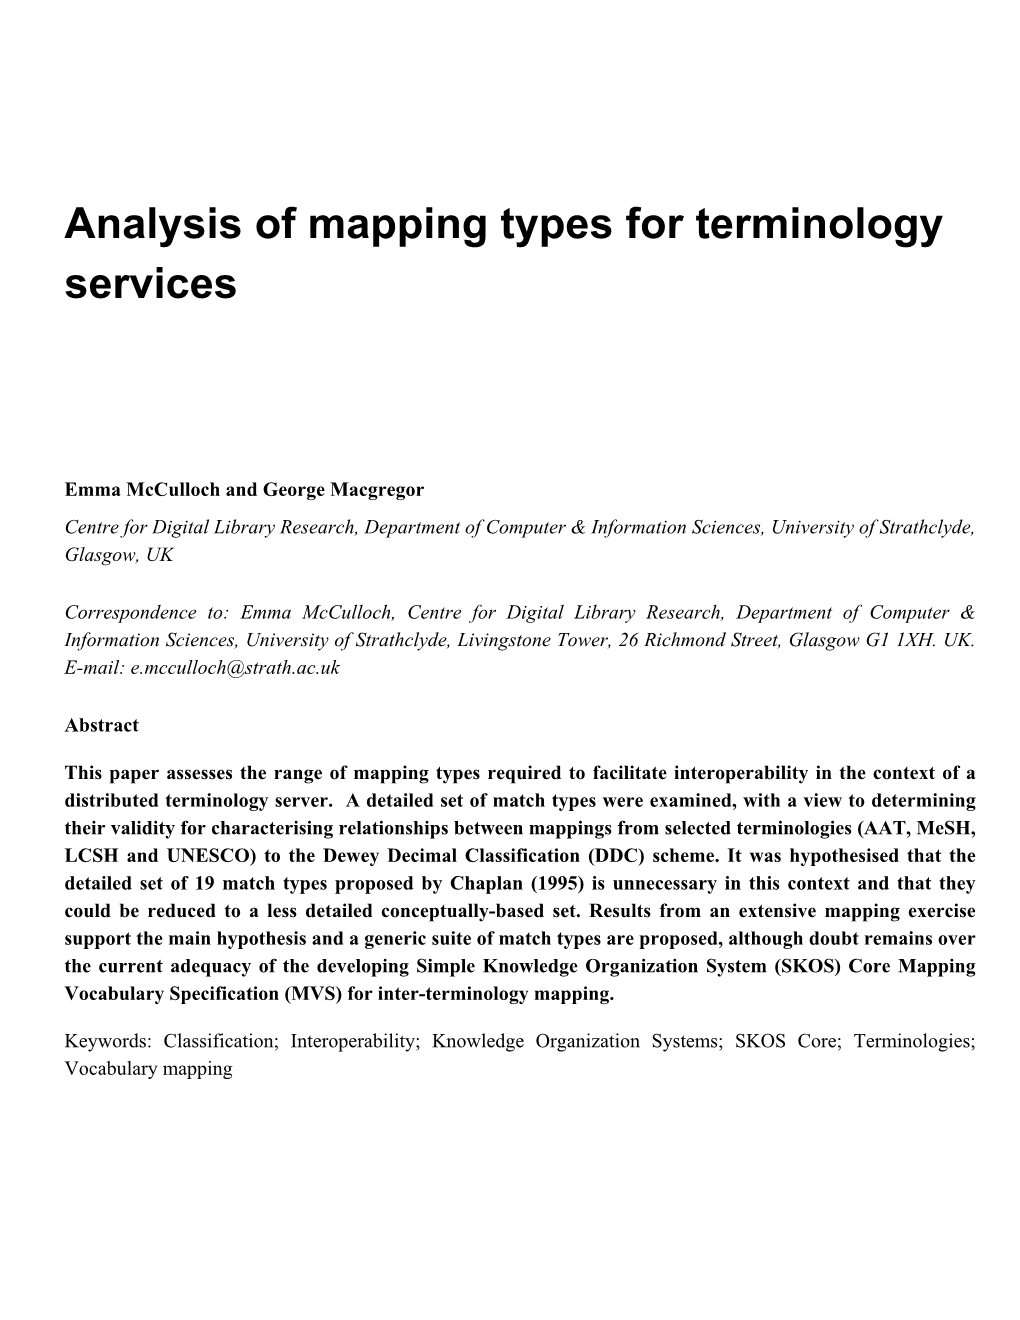 Analysis of Mapping Types for Terminology Services